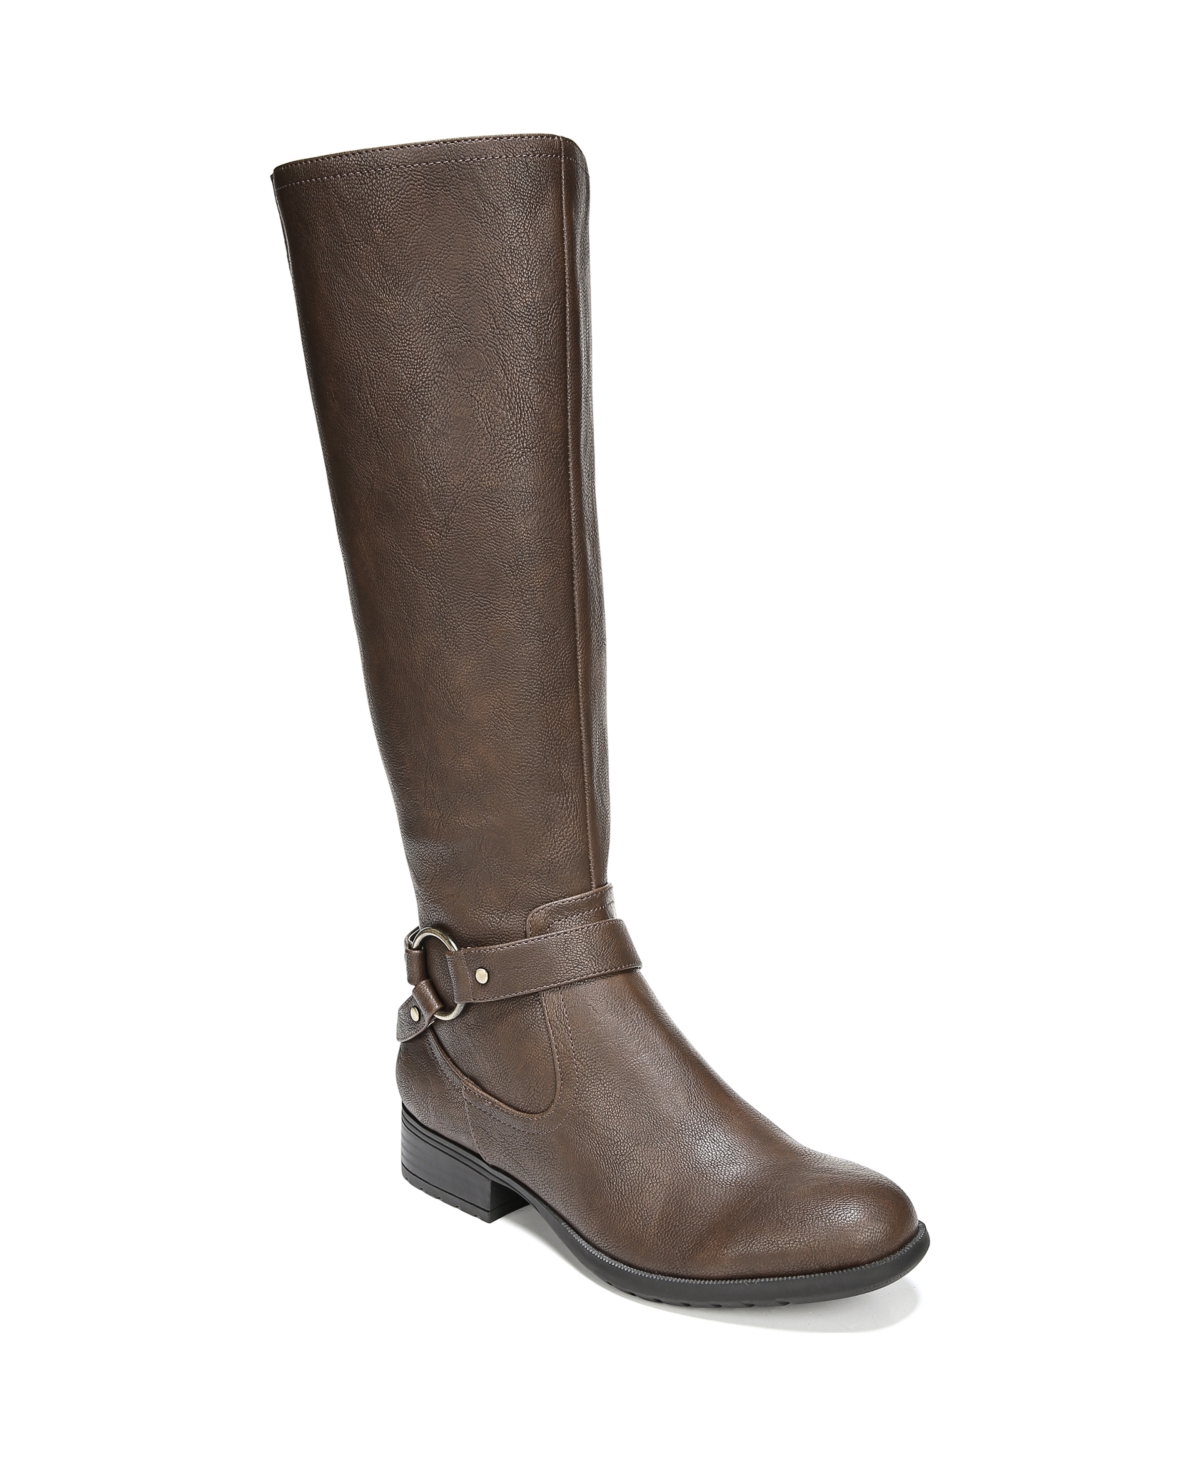 X-Felicity Wide Calf Knee High Boots - Dark Tan Faux Leather